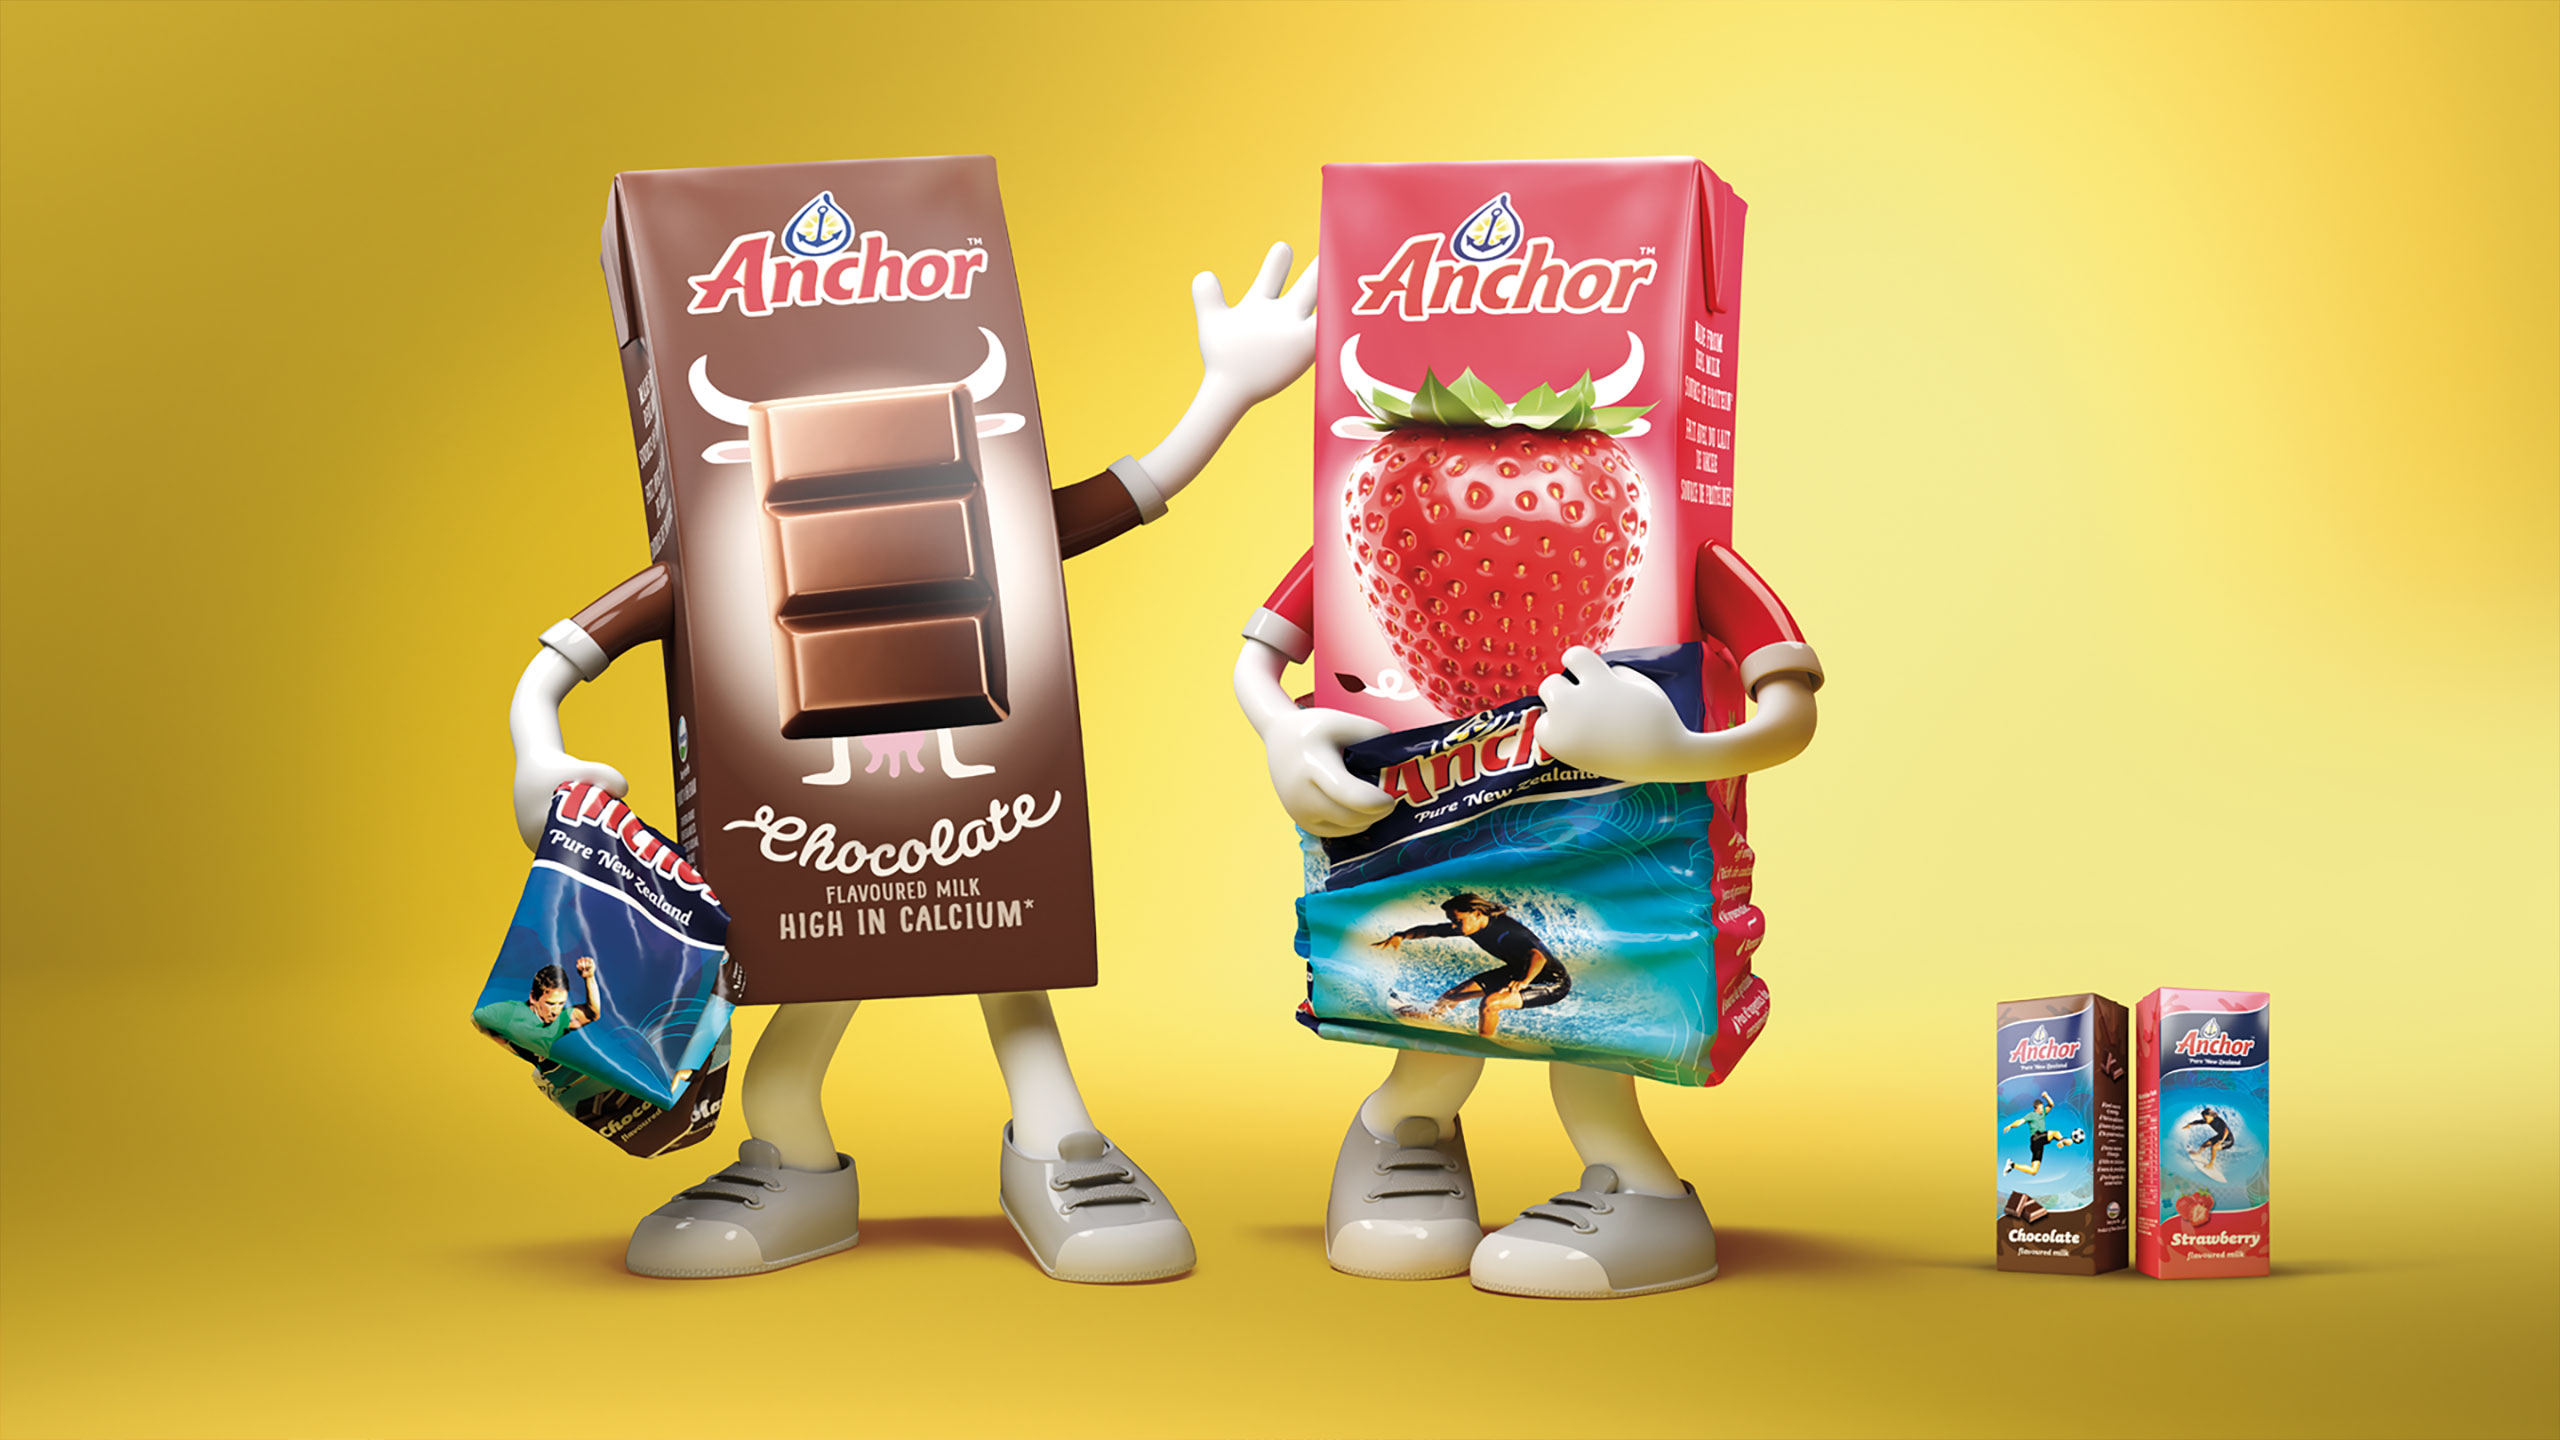 Tried-and-True-Design-Auckland-Anchor-Flavoured-Milk-Characters